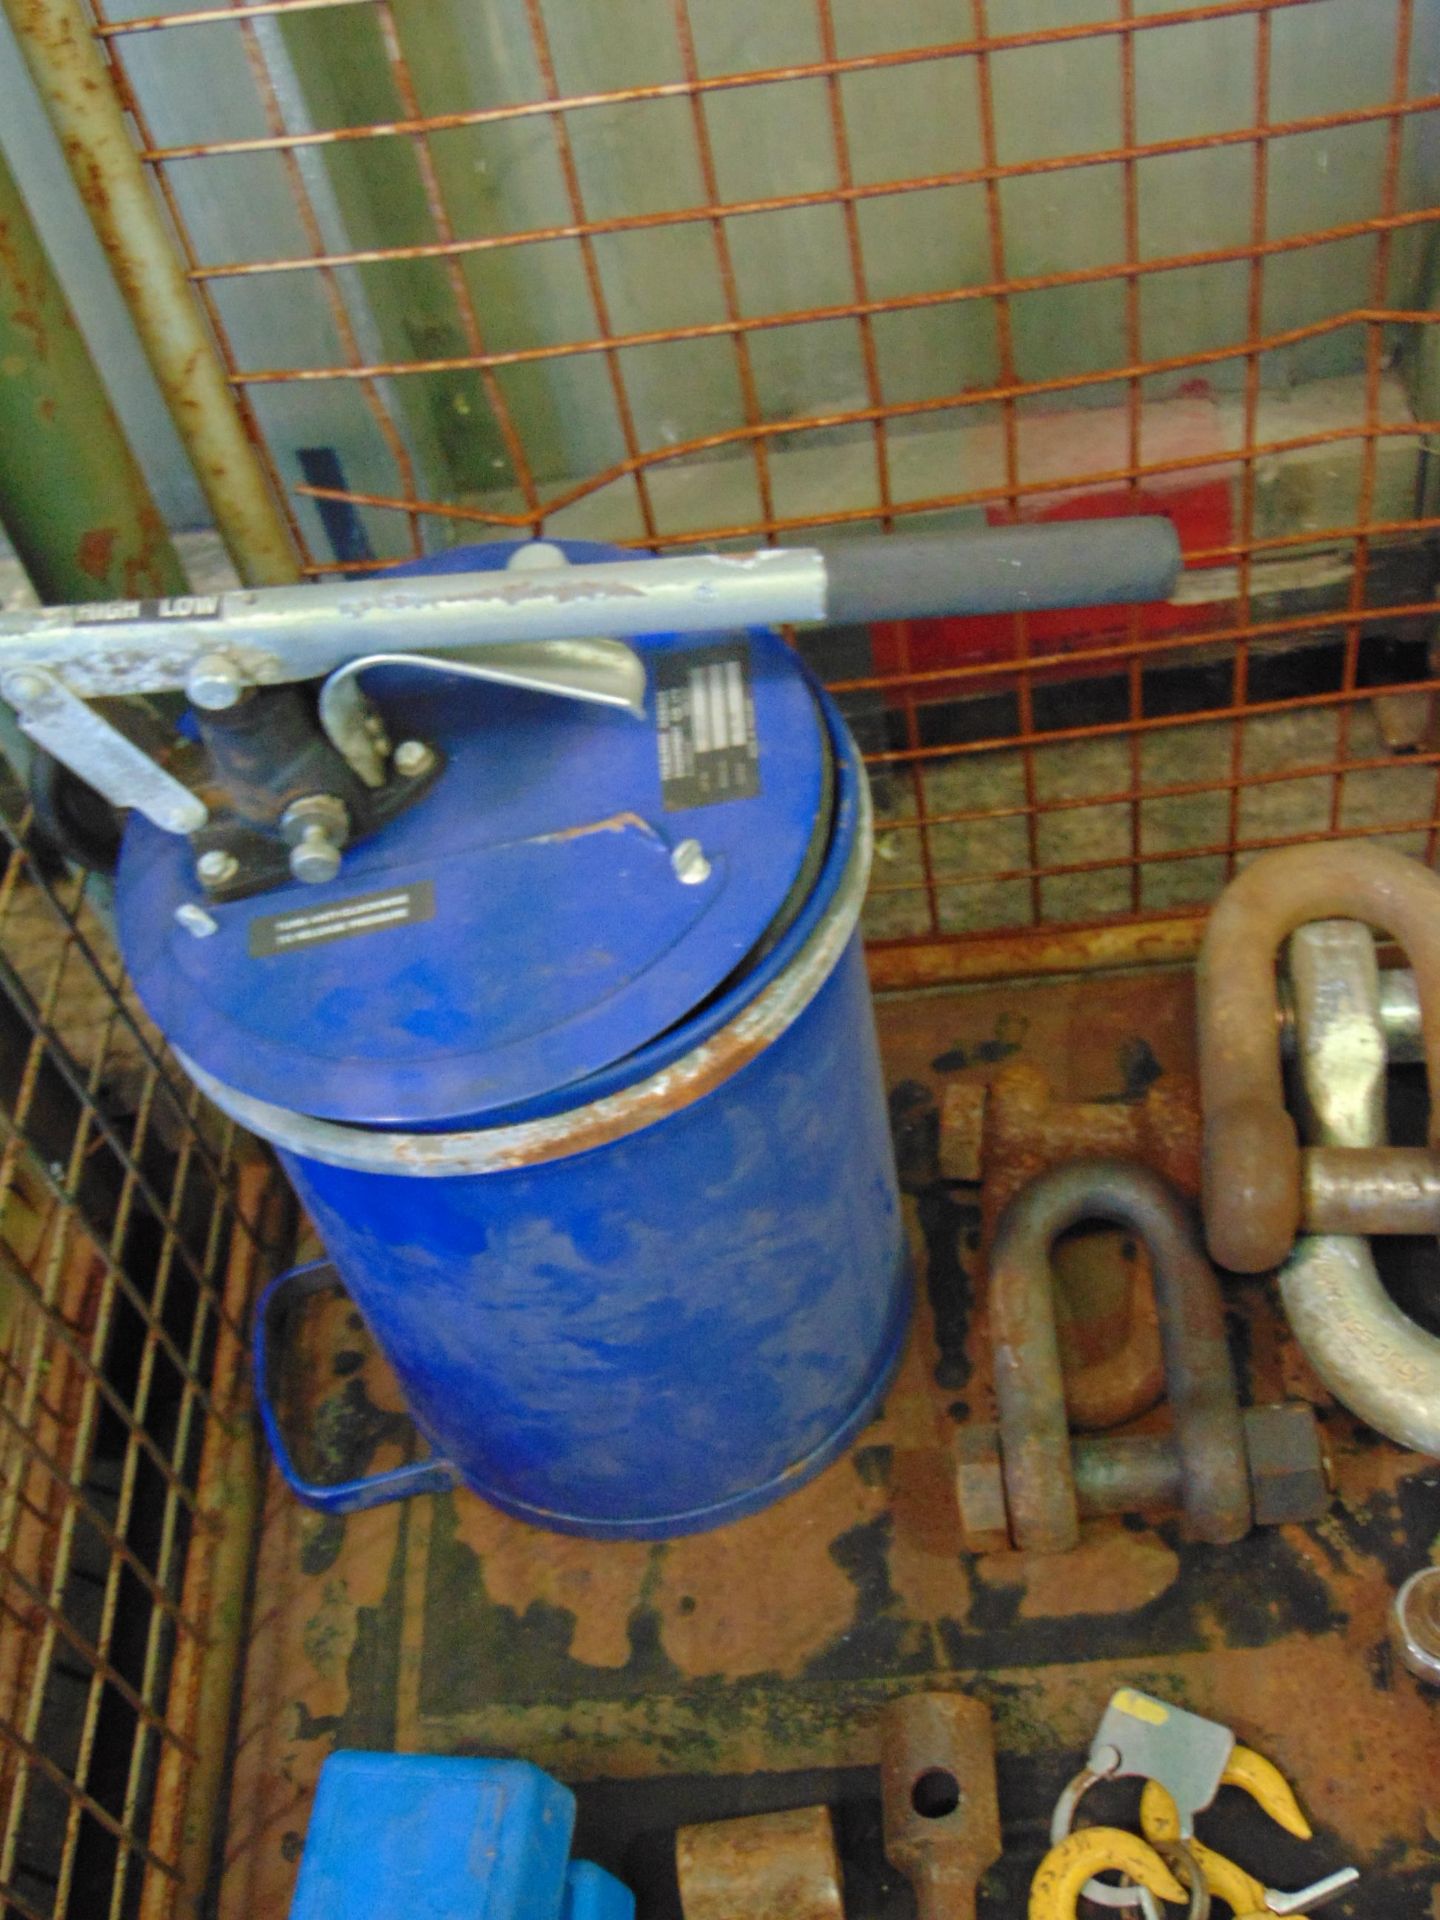 1X STILLAGE OF RECOVERY EQUIPMENT TOOLS GREASE GUN ETC - Image 5 of 6